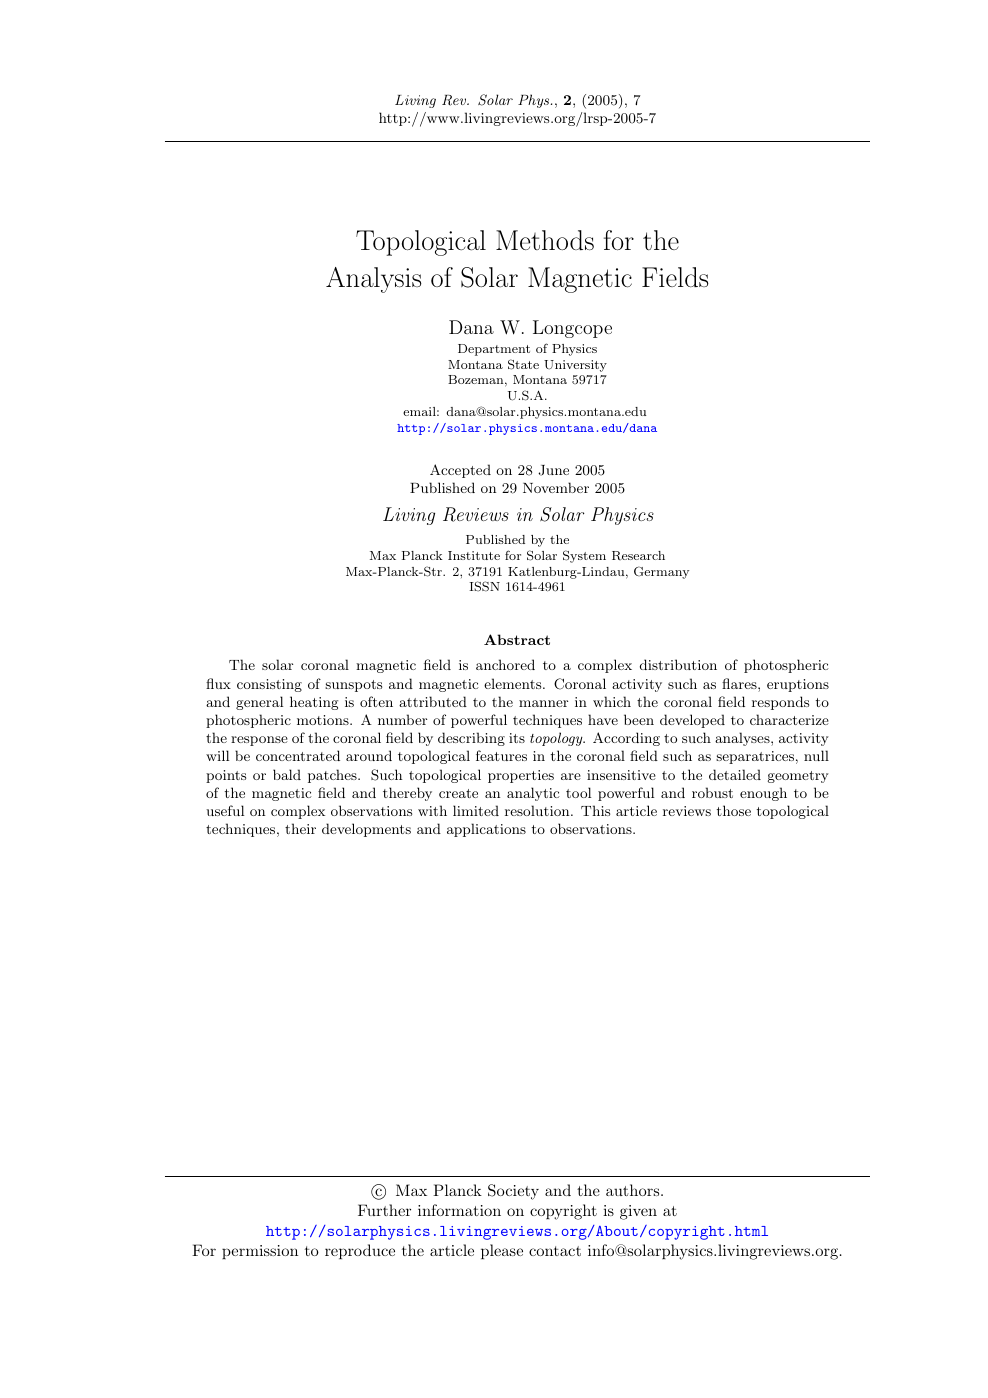 Topological Methods for the Analysis of Solar Magnetic